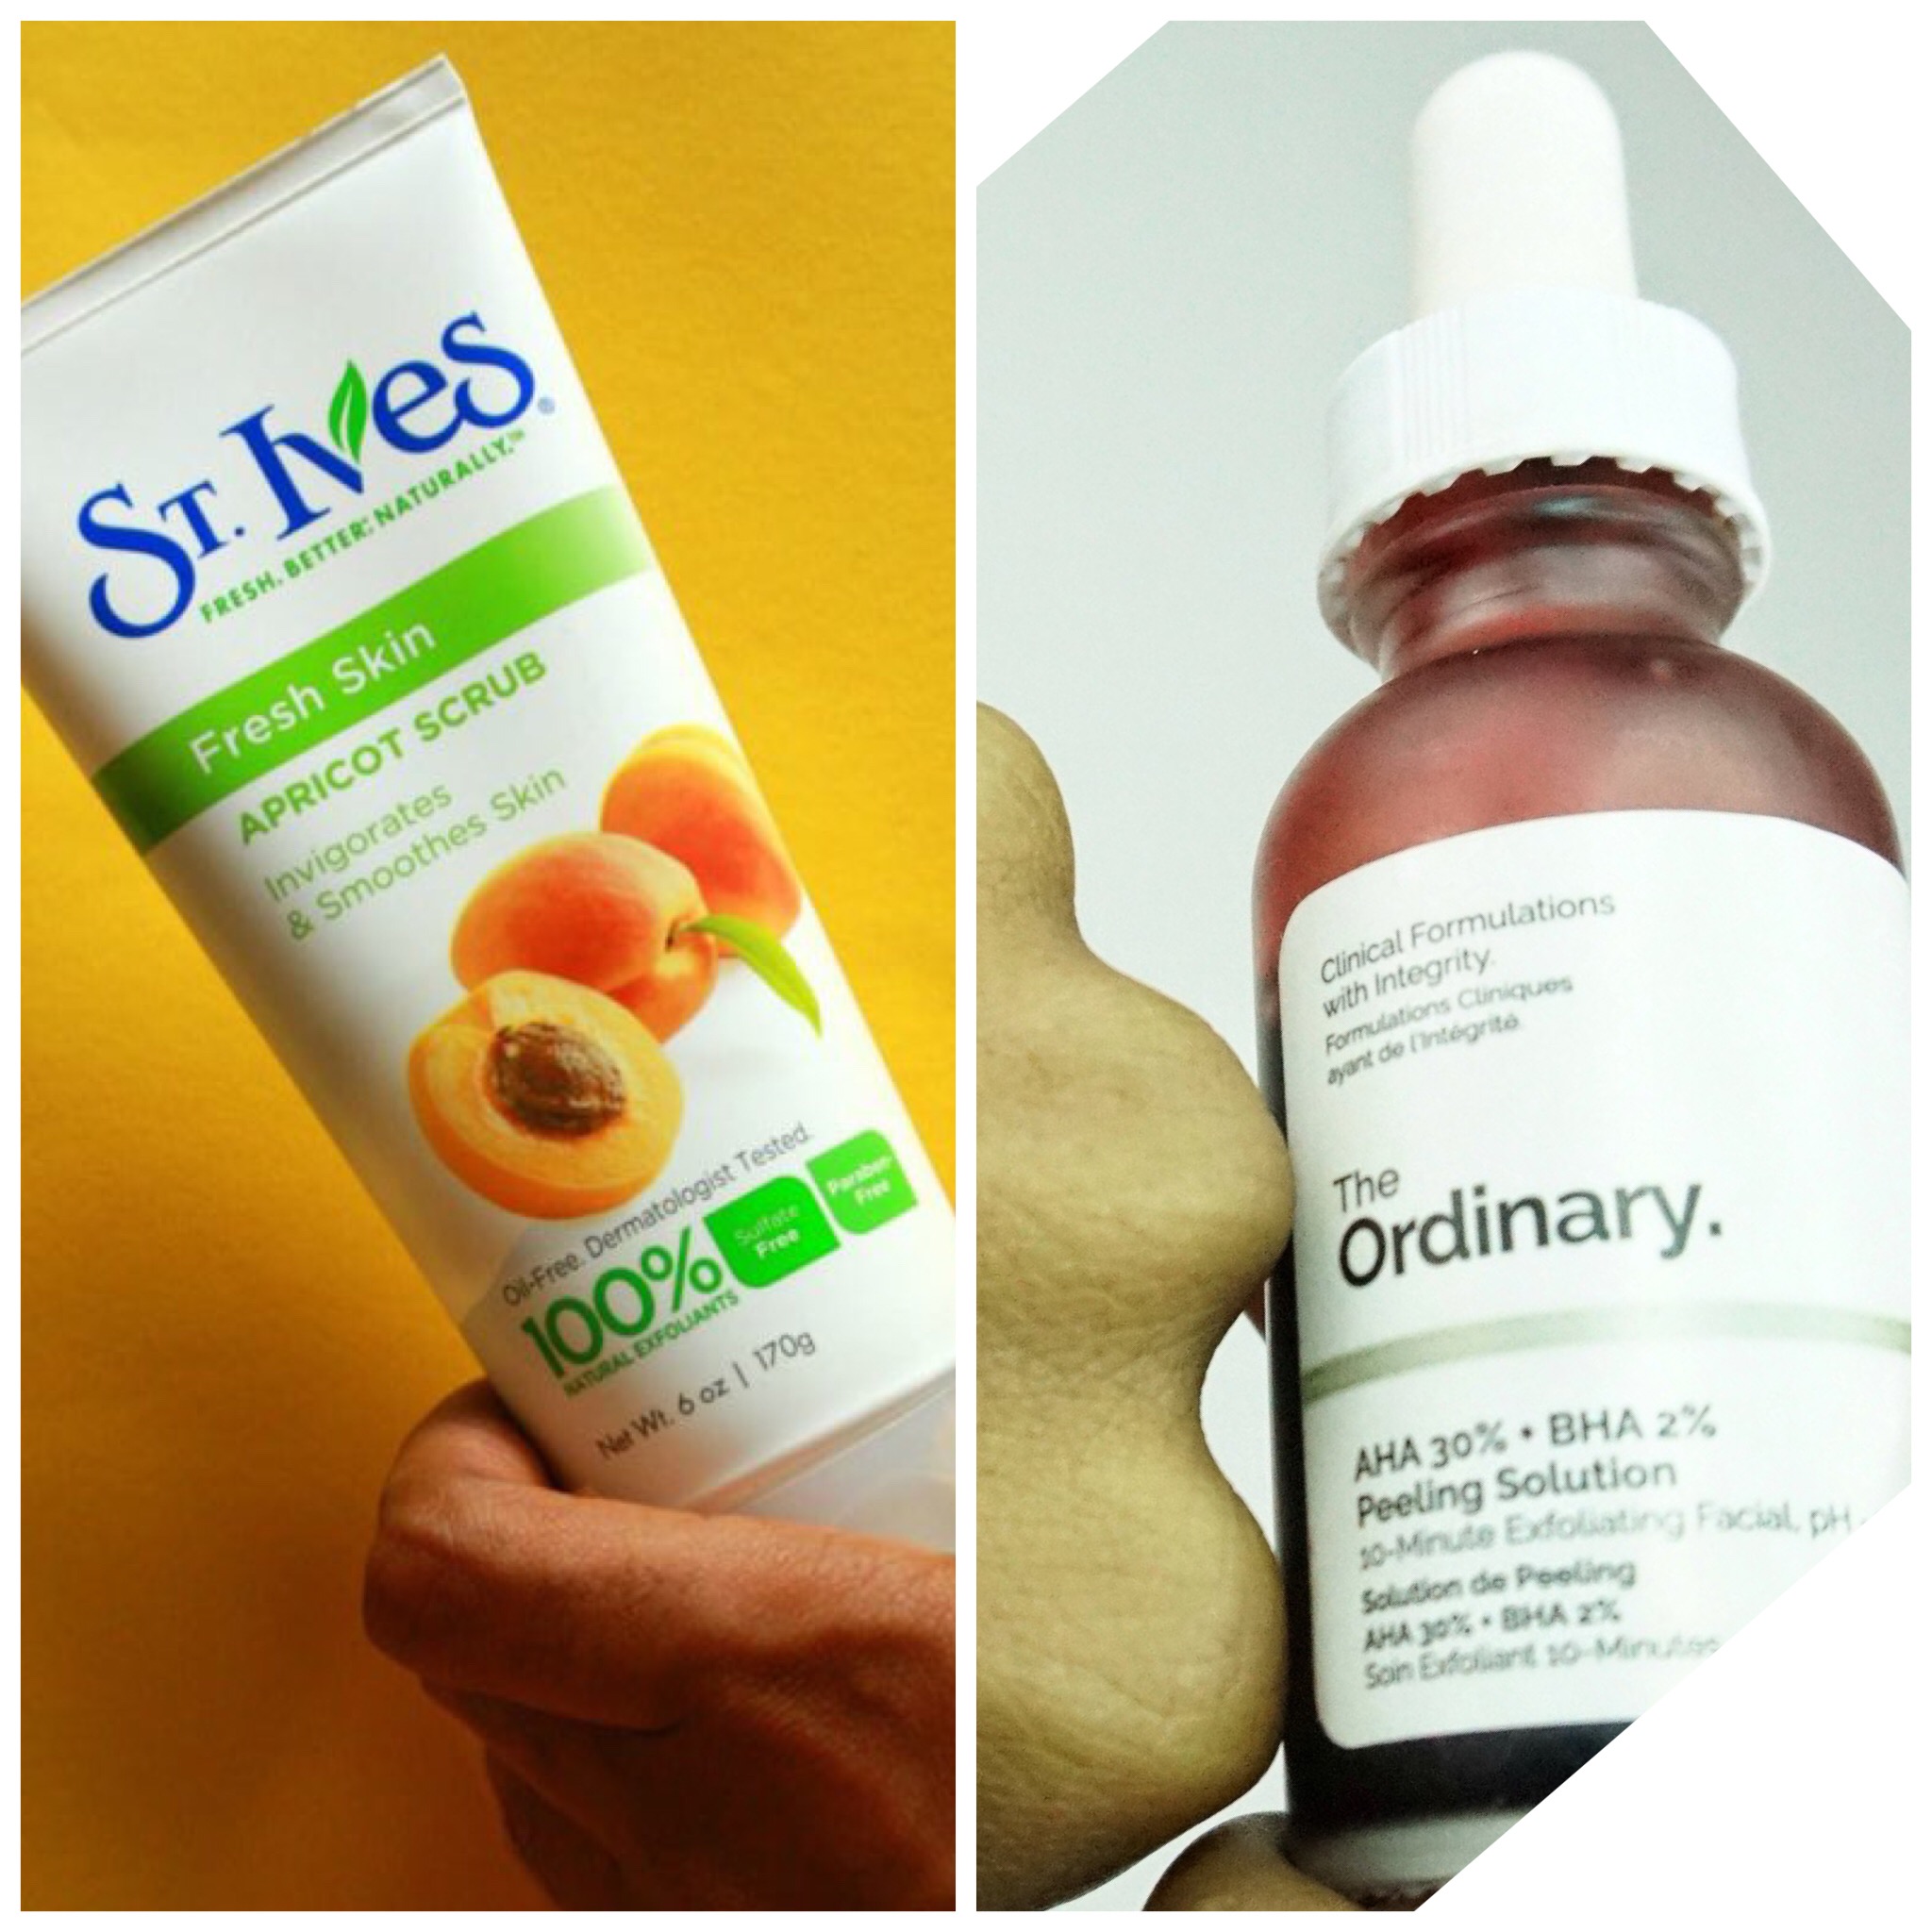 St Ives face scrub and the ordinary bha solution 